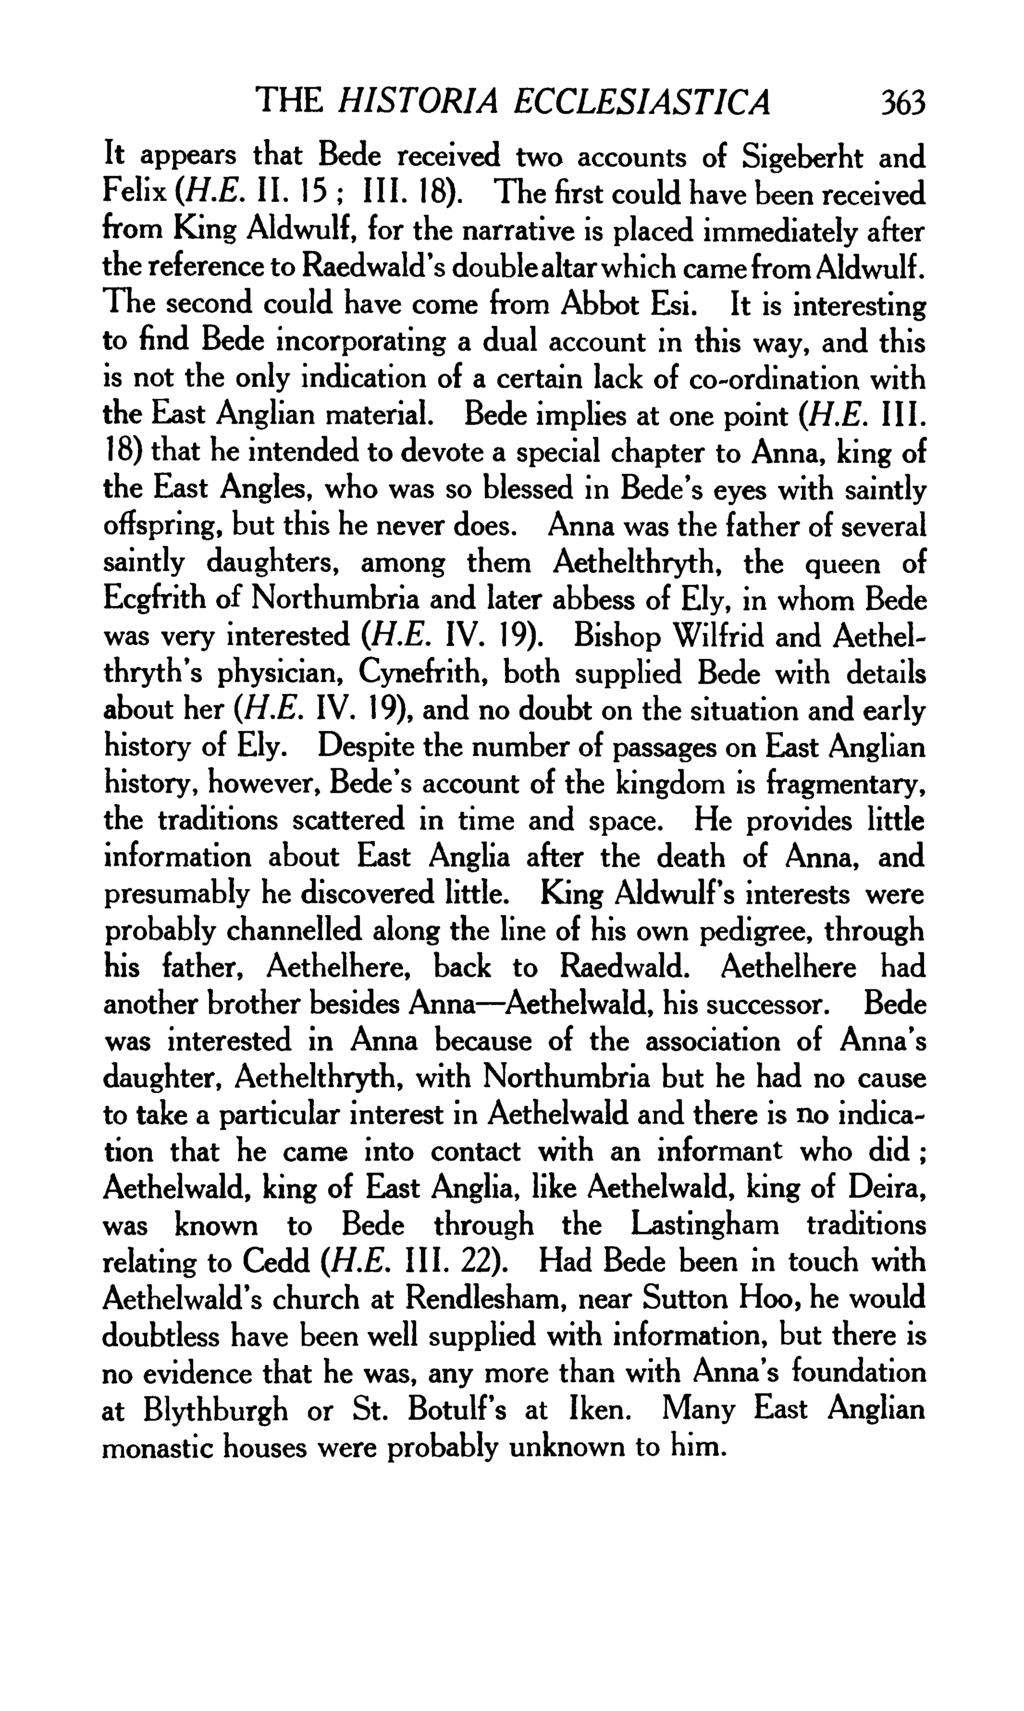 THE HISTORIA ECCLESIASTICA 363 It appears that Bede received two accounts of Sigeberht and Felix (H.E. II. 15 ; III. 18).